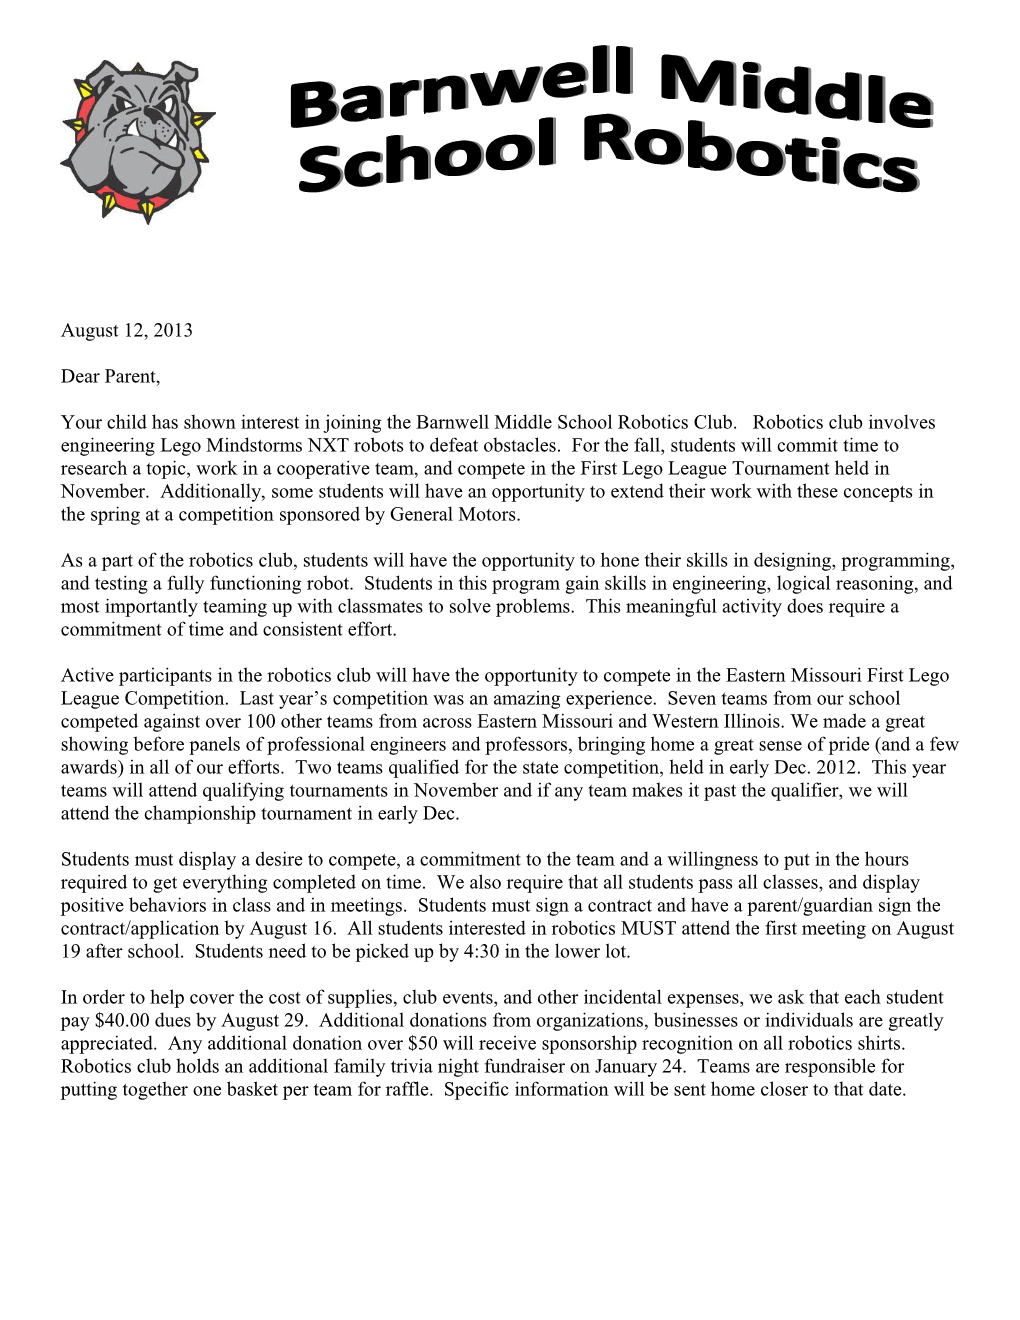 As a Part of the Robotics Club, Students Will Have the Opportunity to Hone Their Skills